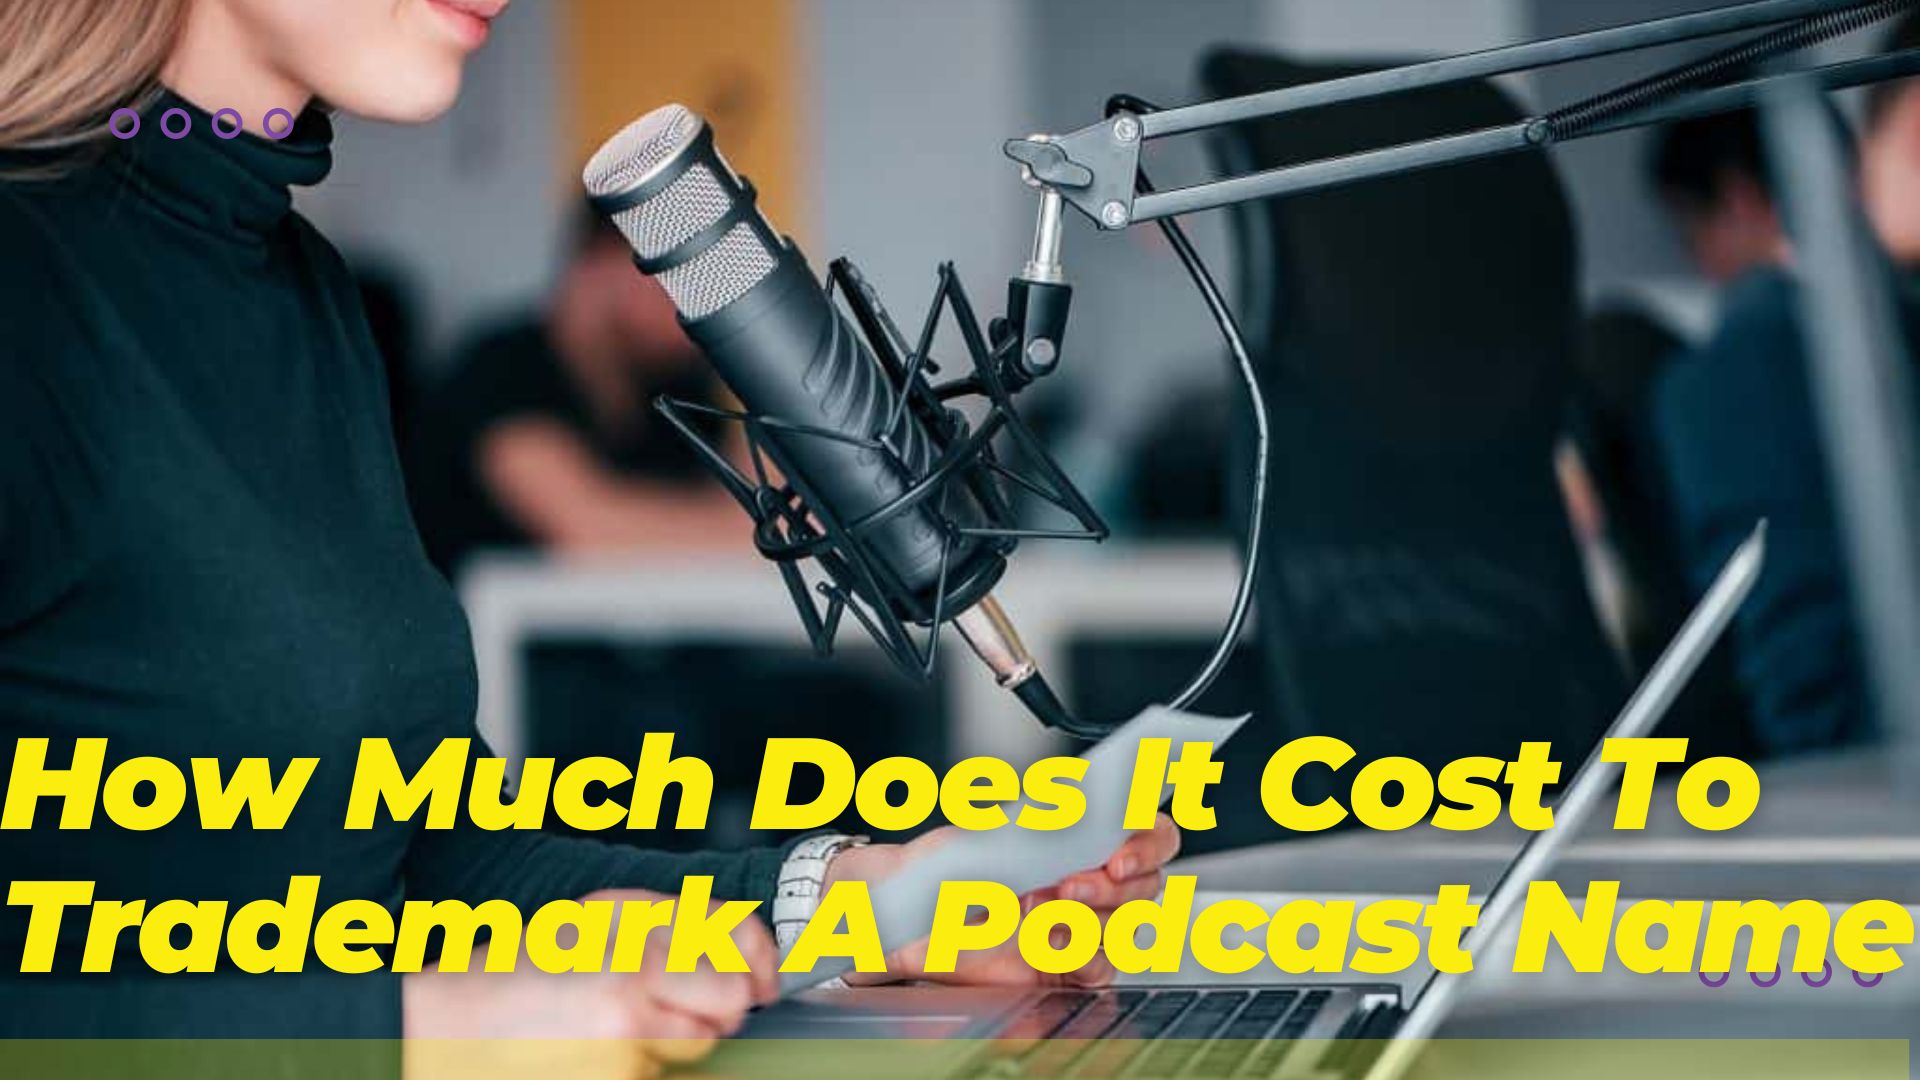 How Much Does It Cost To Trademark A Podcast Name?